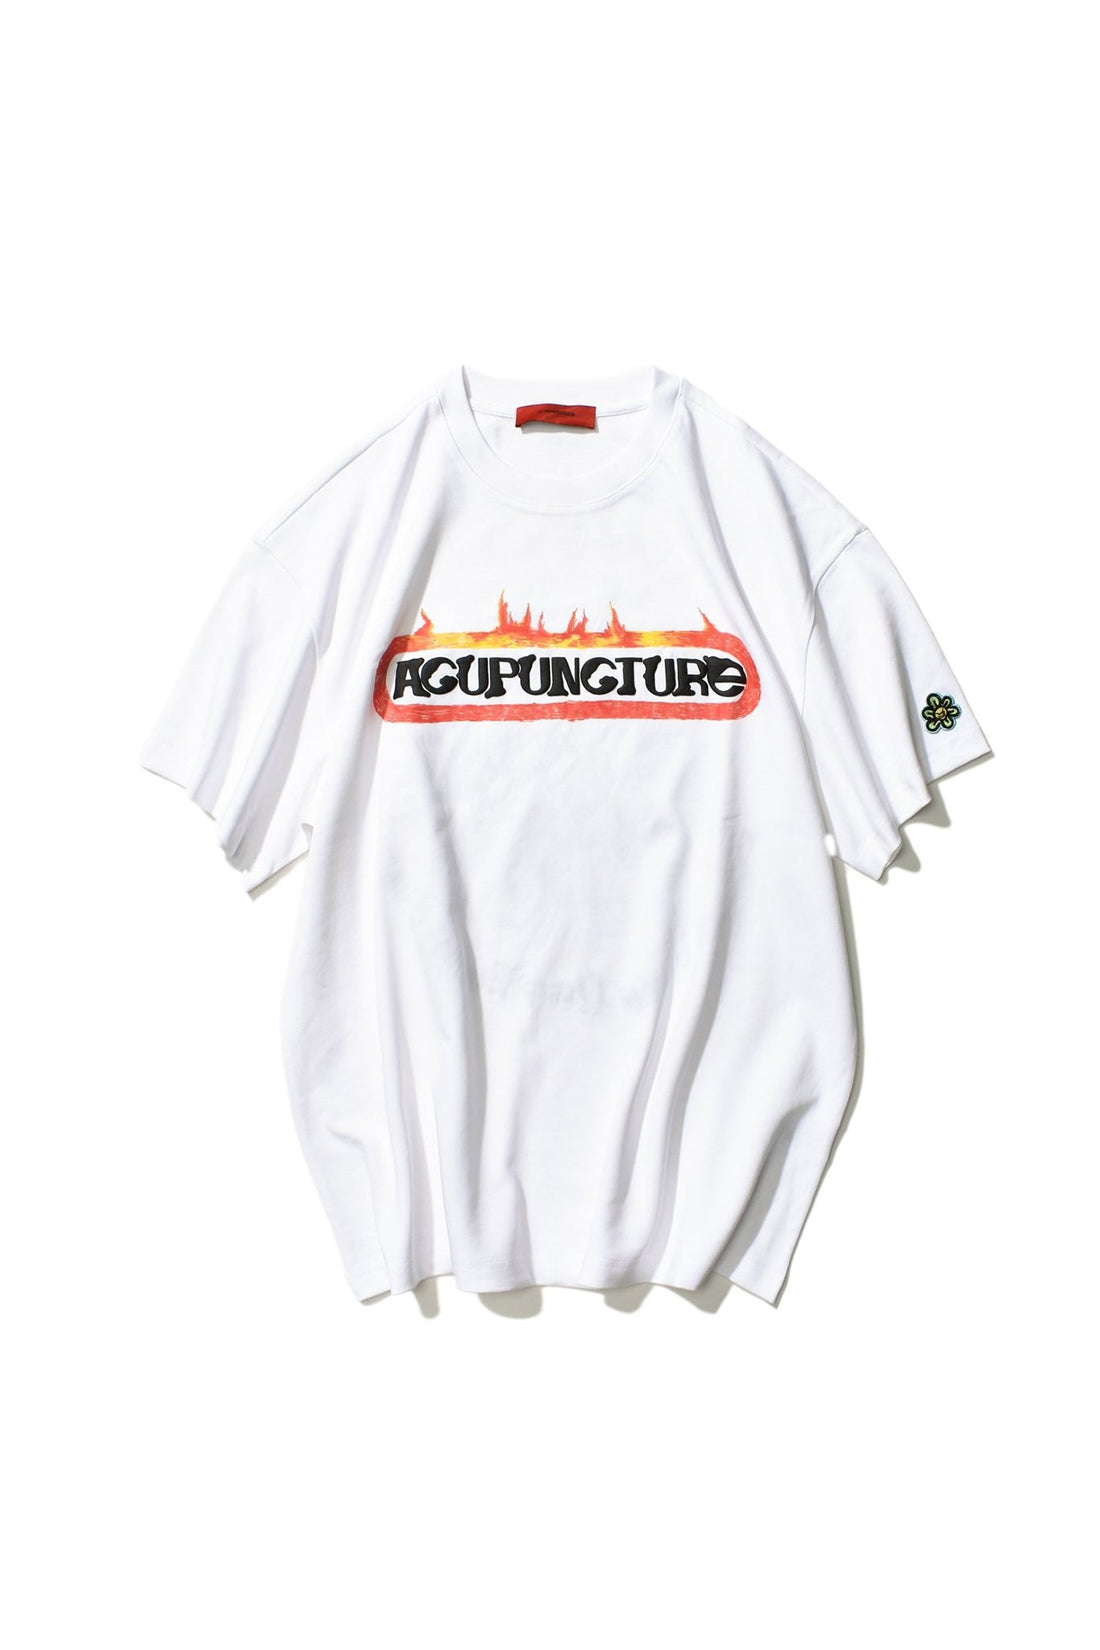 SACRED TREE T-SHIRT WHITE Acupuncture